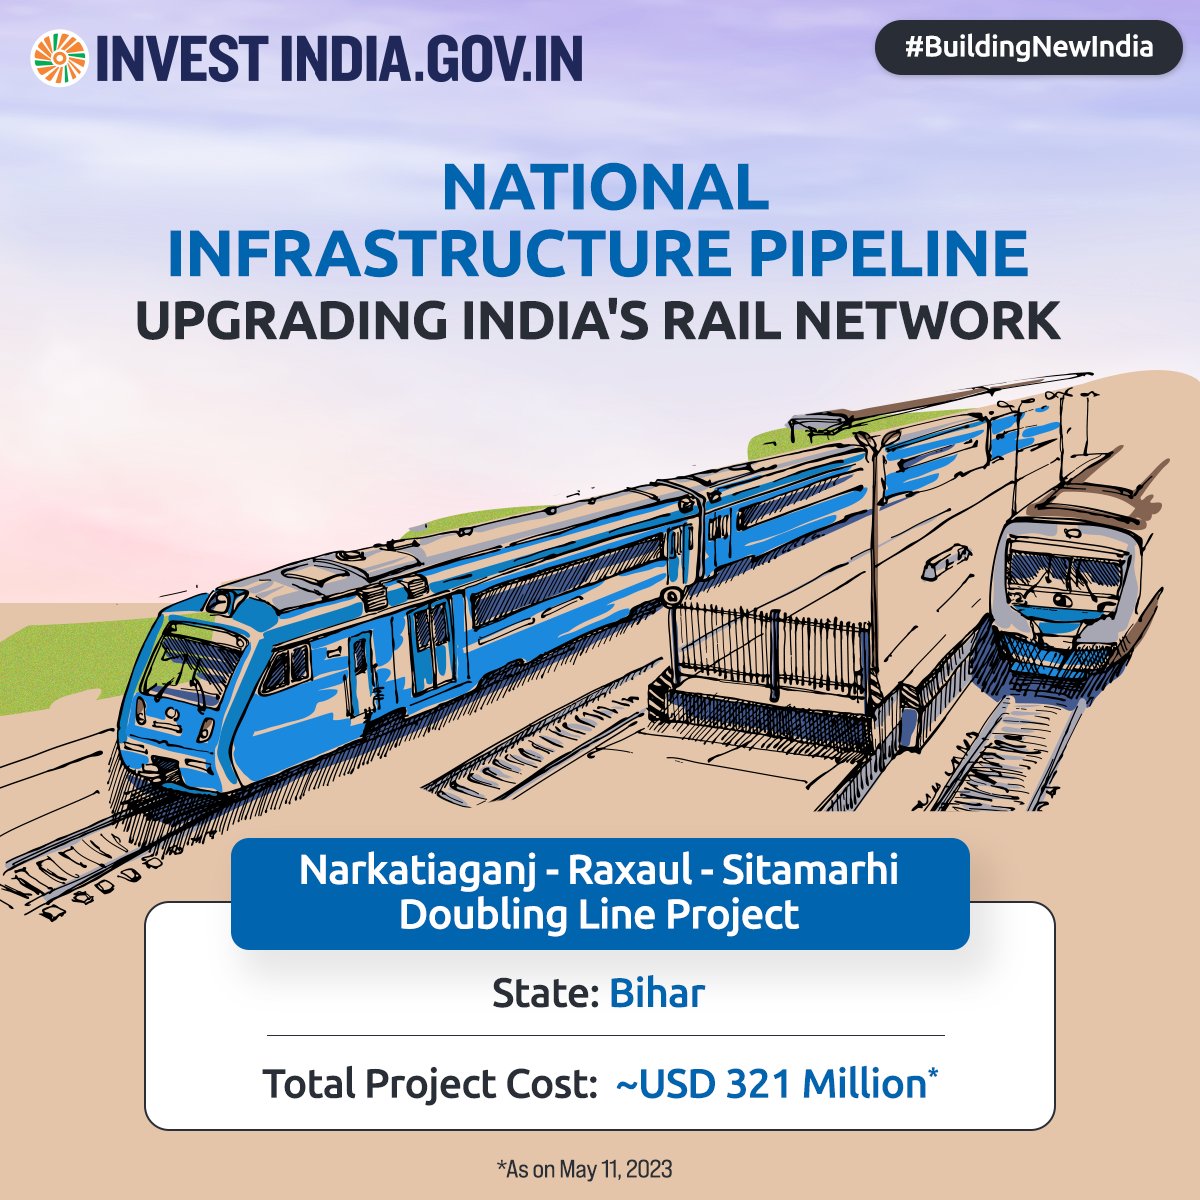 Narkatiaganj - Raxaul - Sitamarhi Doubling Line Project aims to ease congestion to allow faster and more reliable movement with minimum delays across Bihar.
#NationalInfrastructurePipeline
@spjdivn